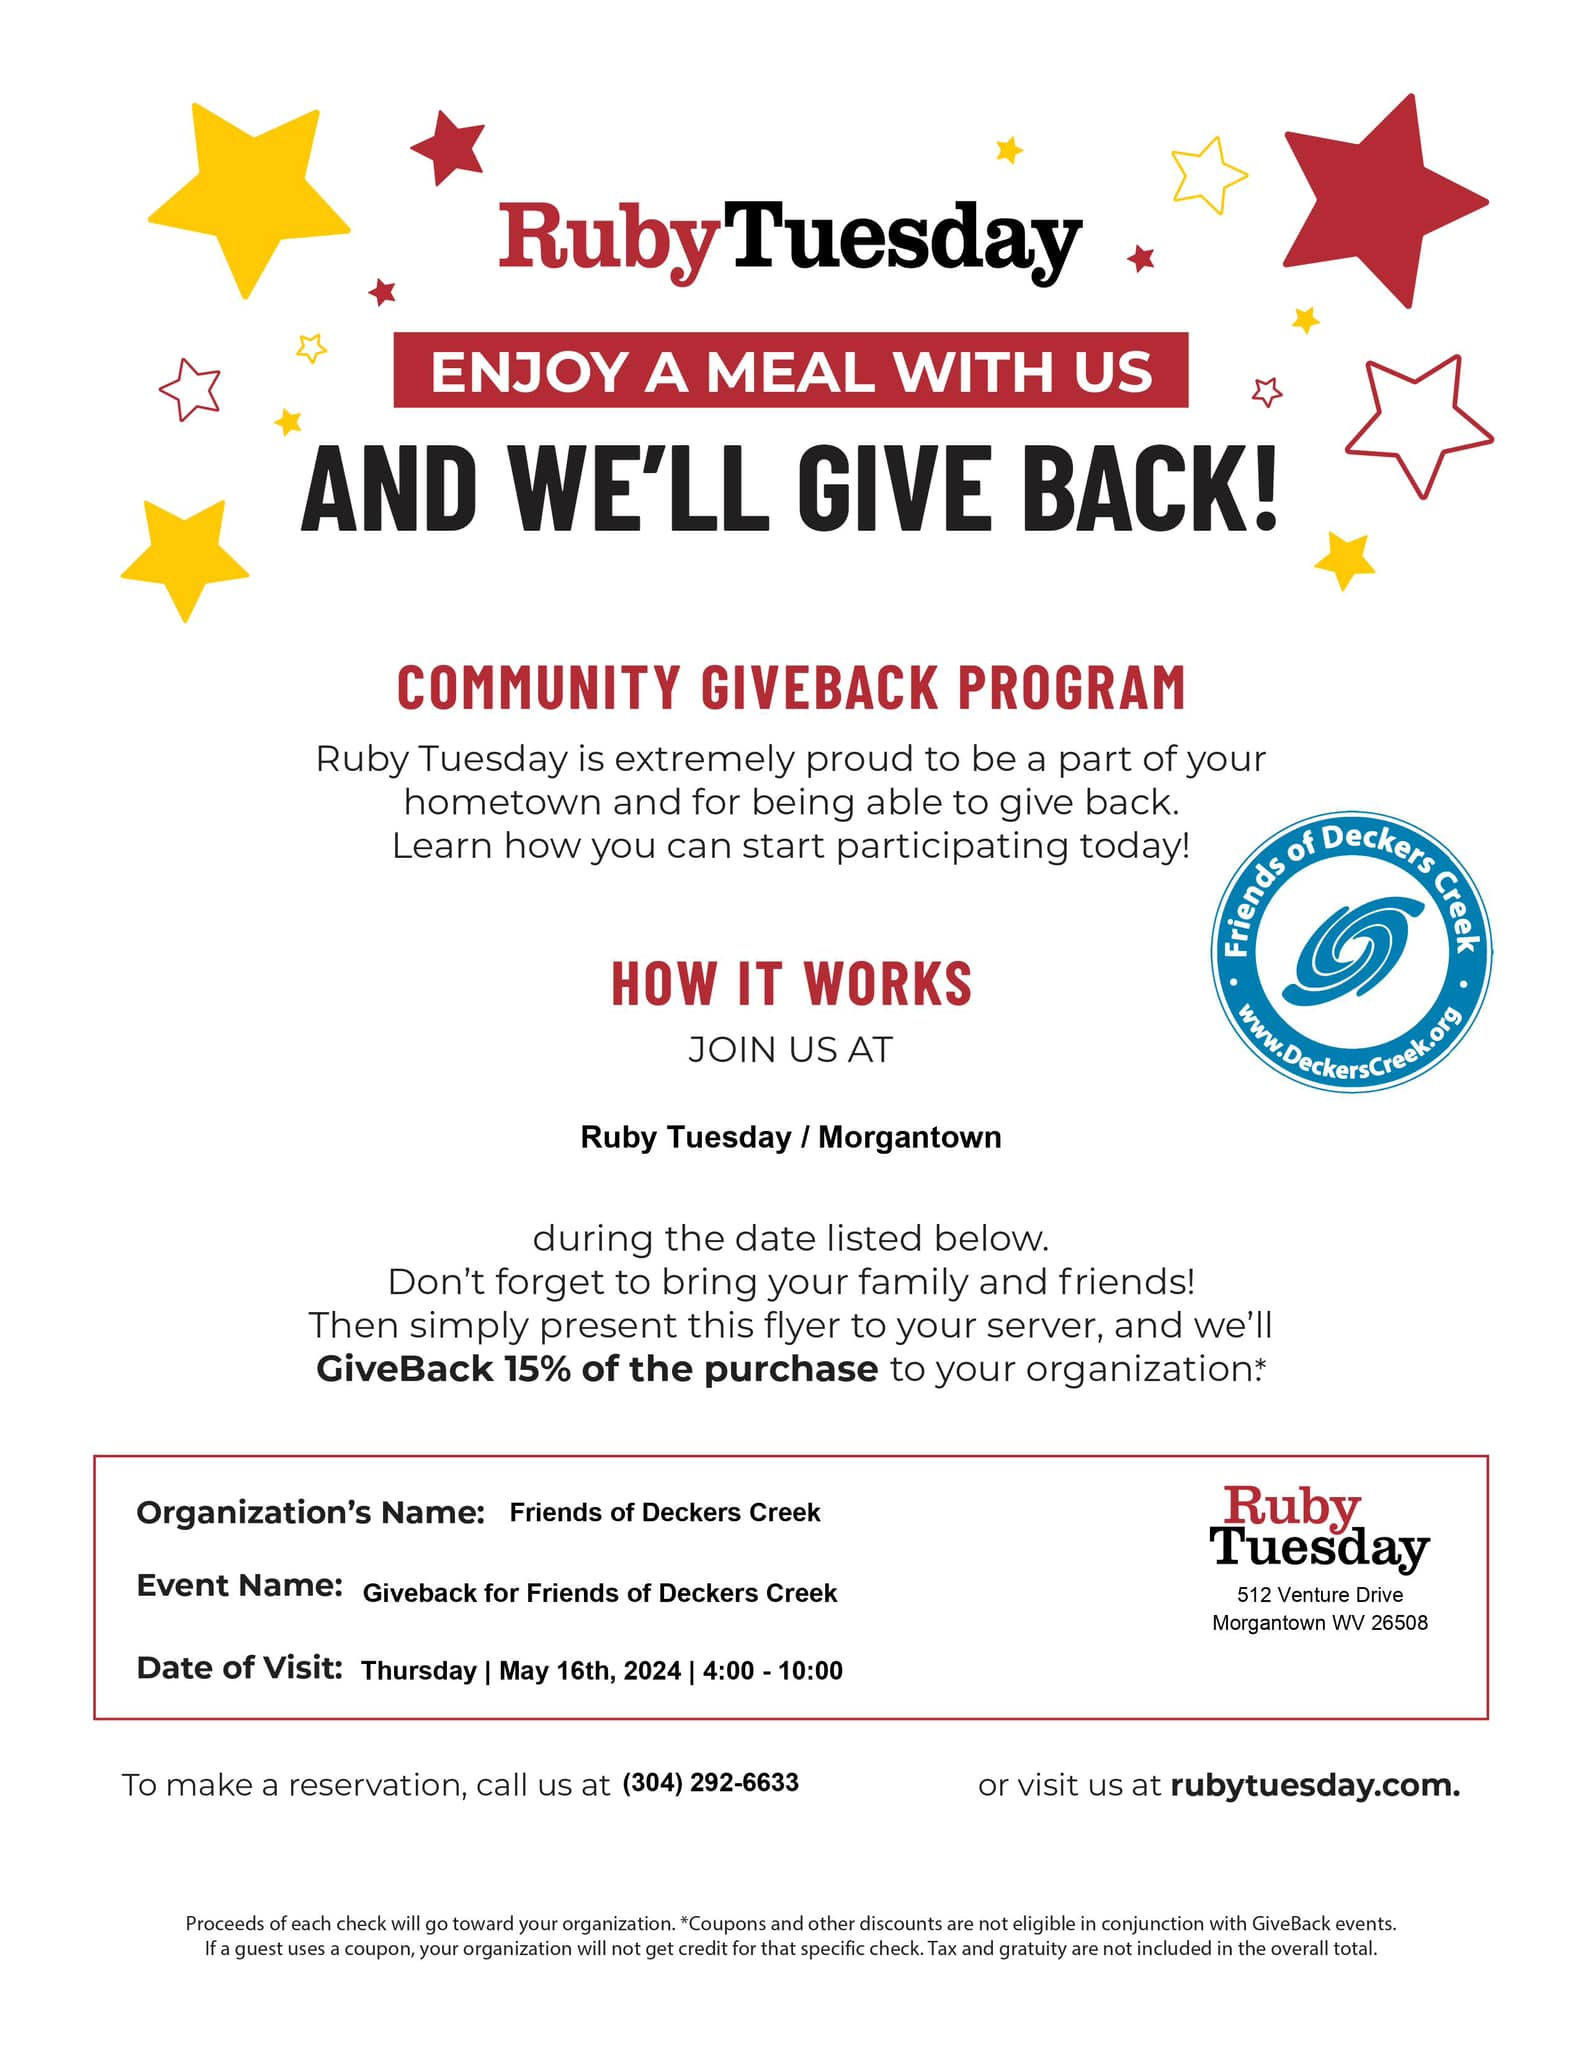 Ruby Tuesday GiveBack for Friends of Deckers Creek